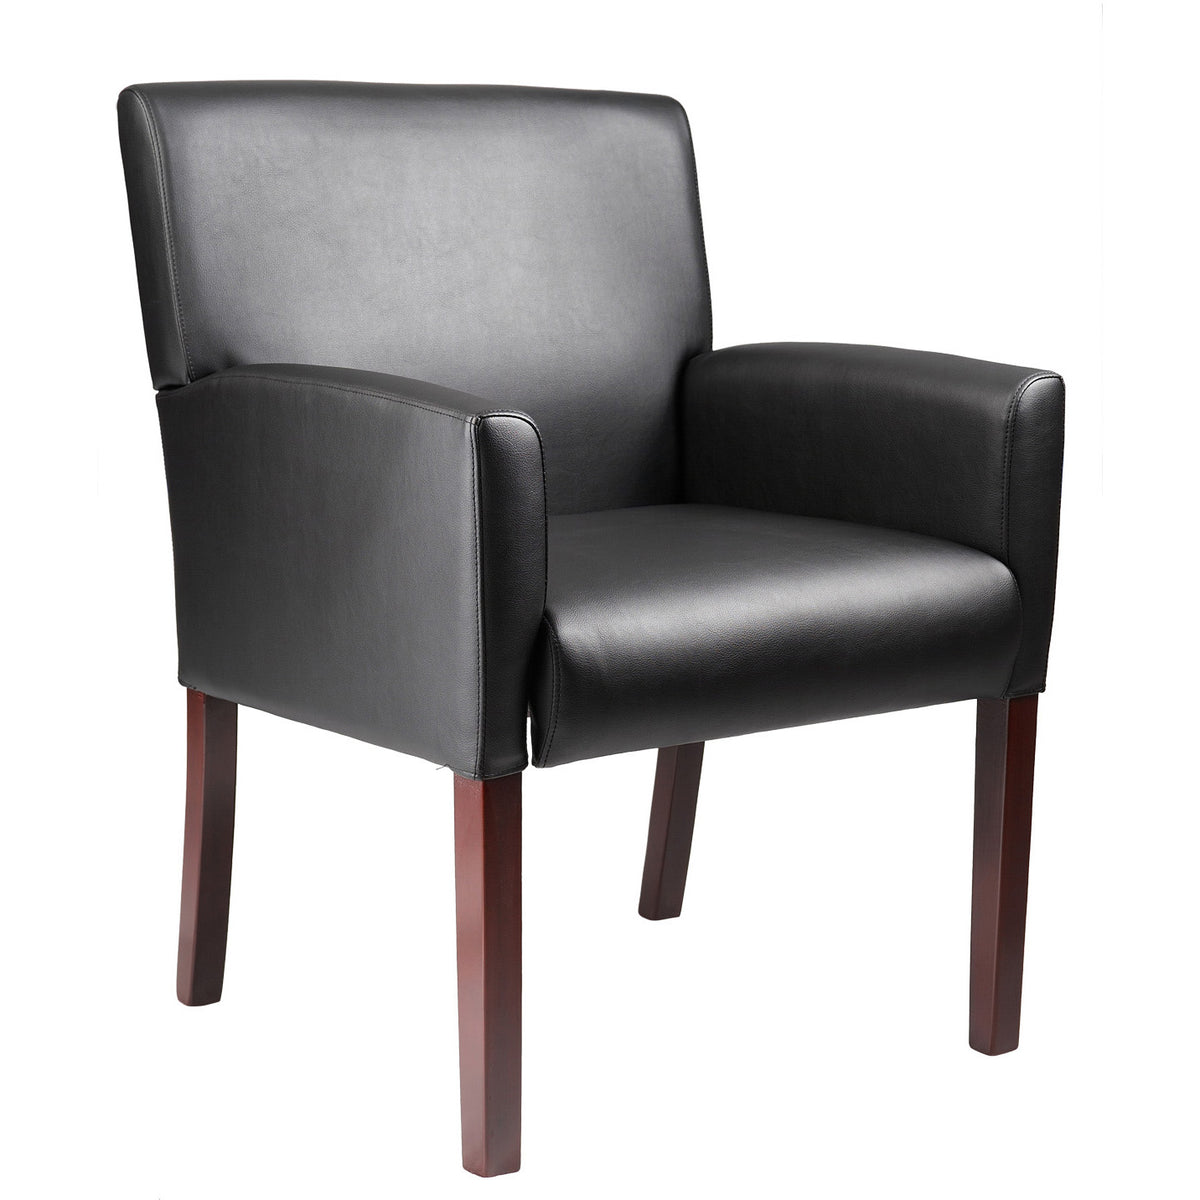 Box Arm guest, accent or dining chair with Mahogany Finish, B629M